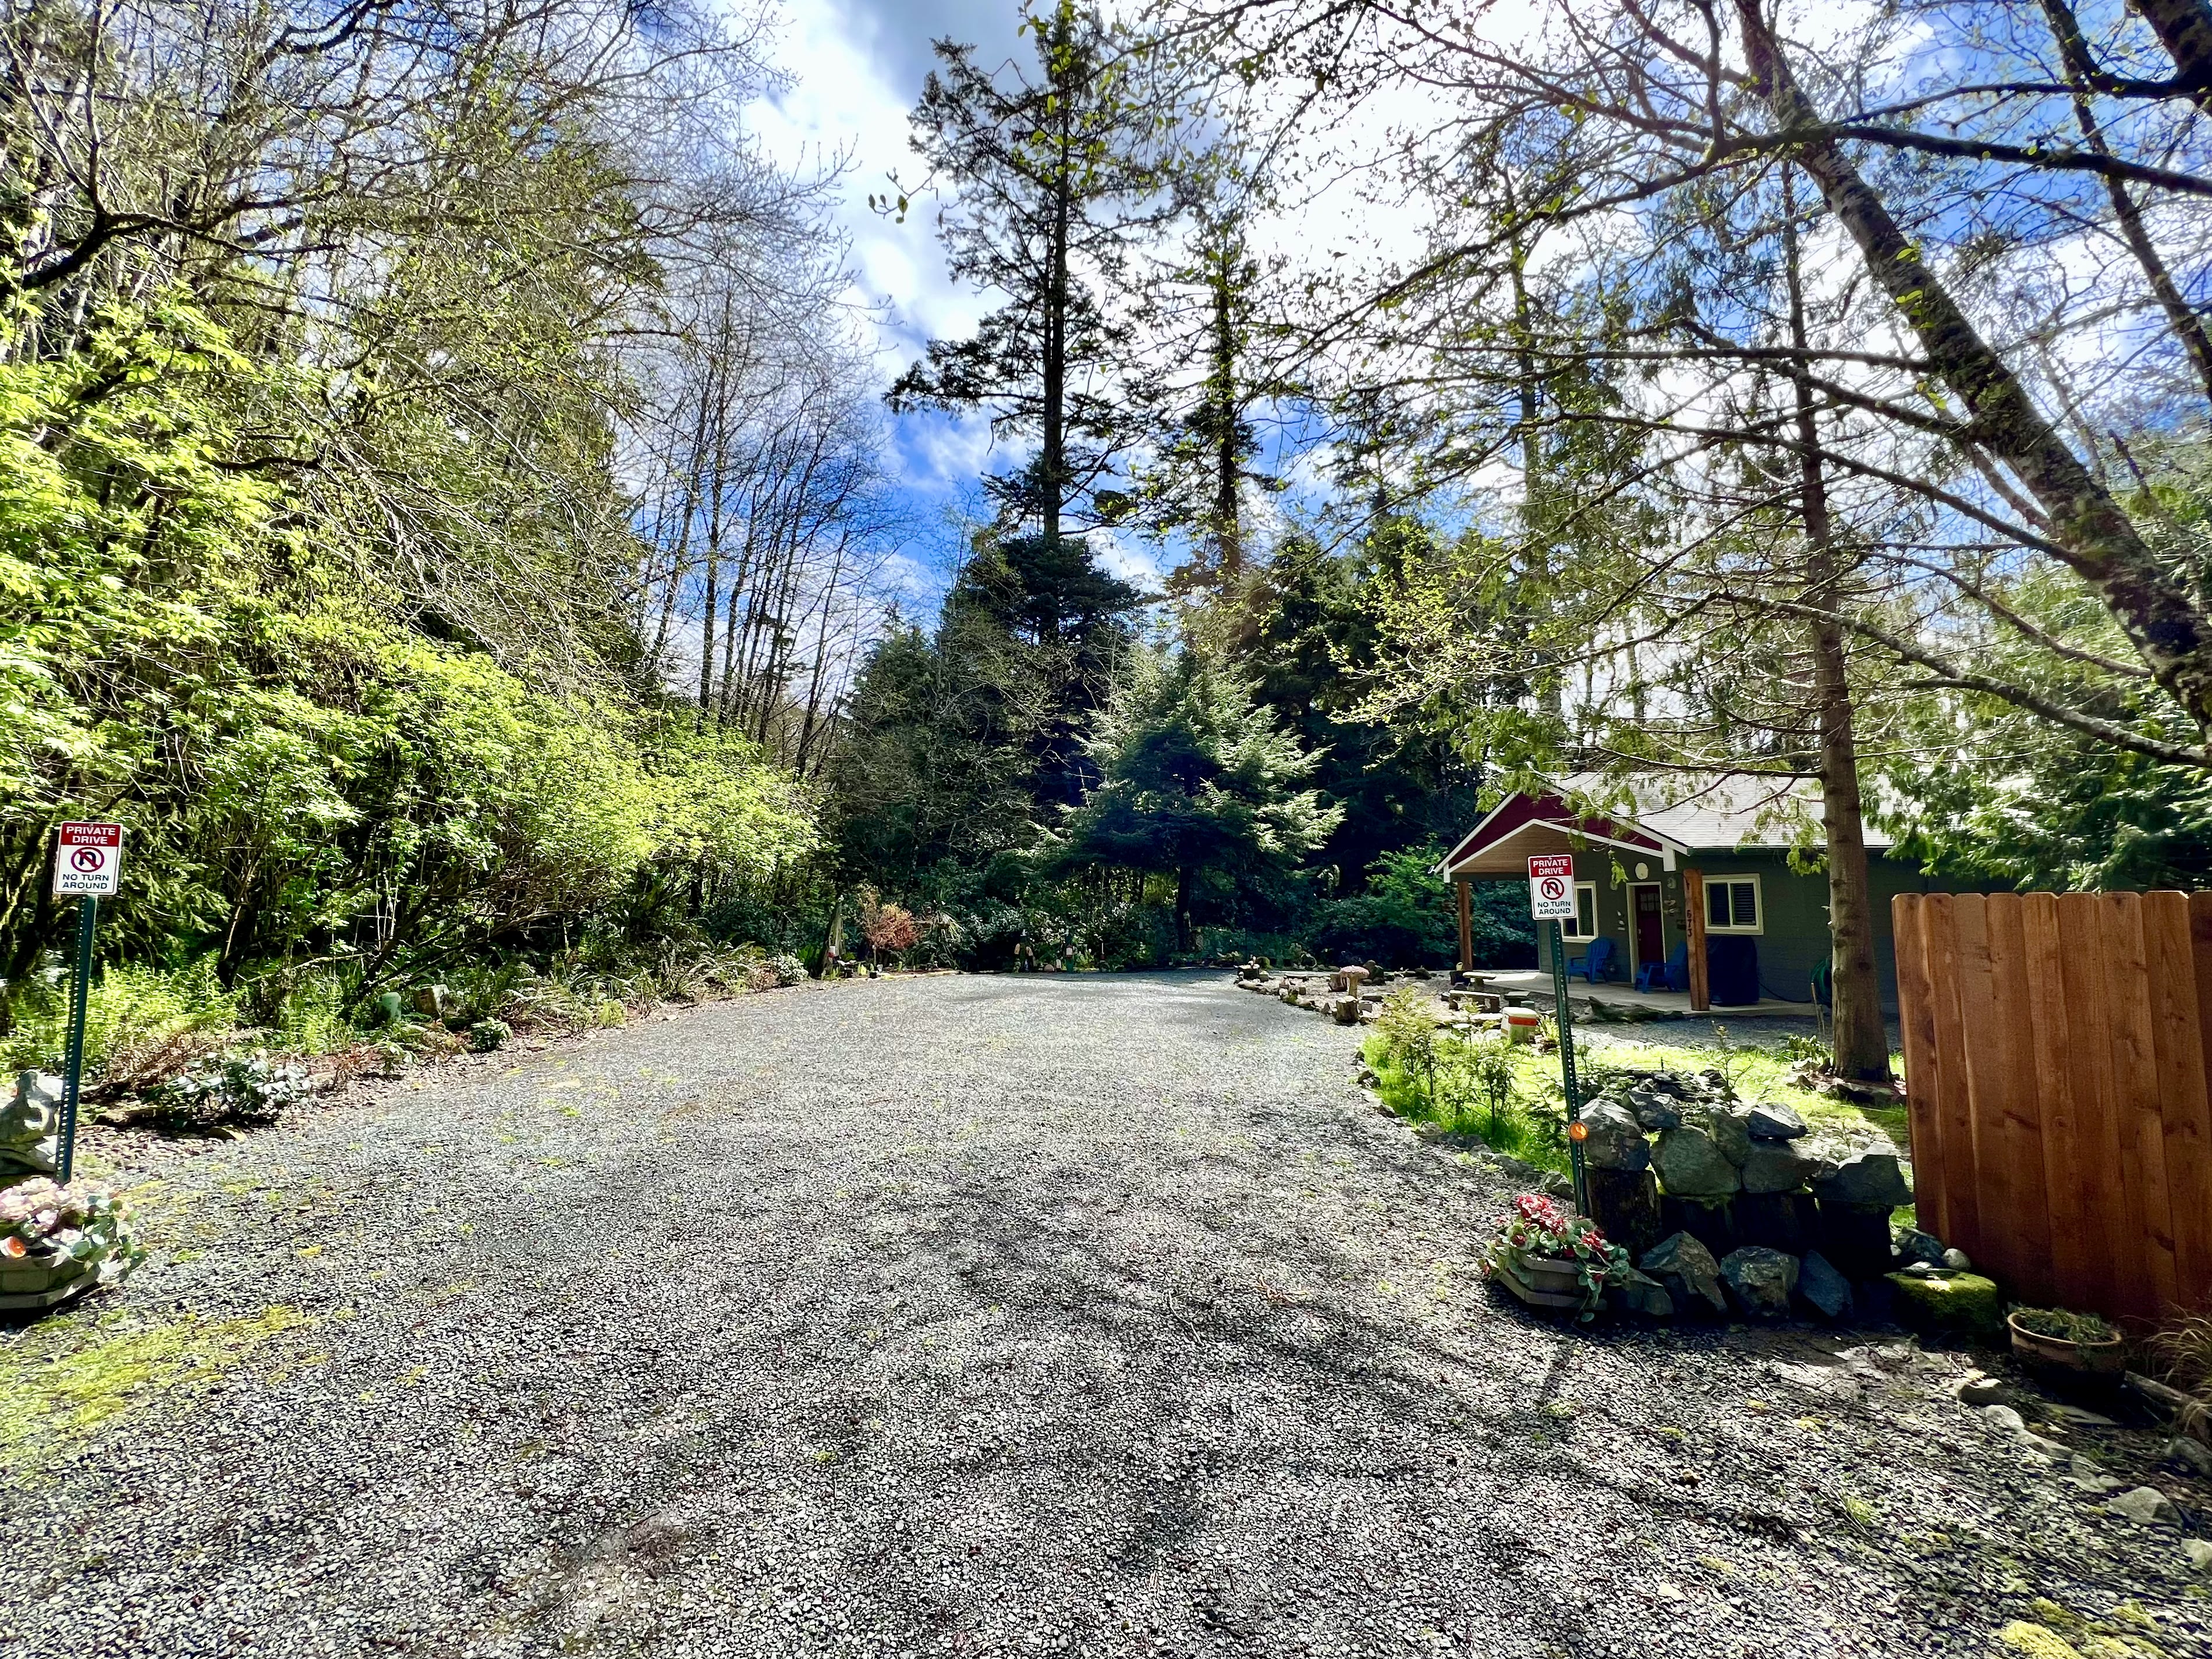 Property at end of dead end street, bordered by forest and hundred year old trees